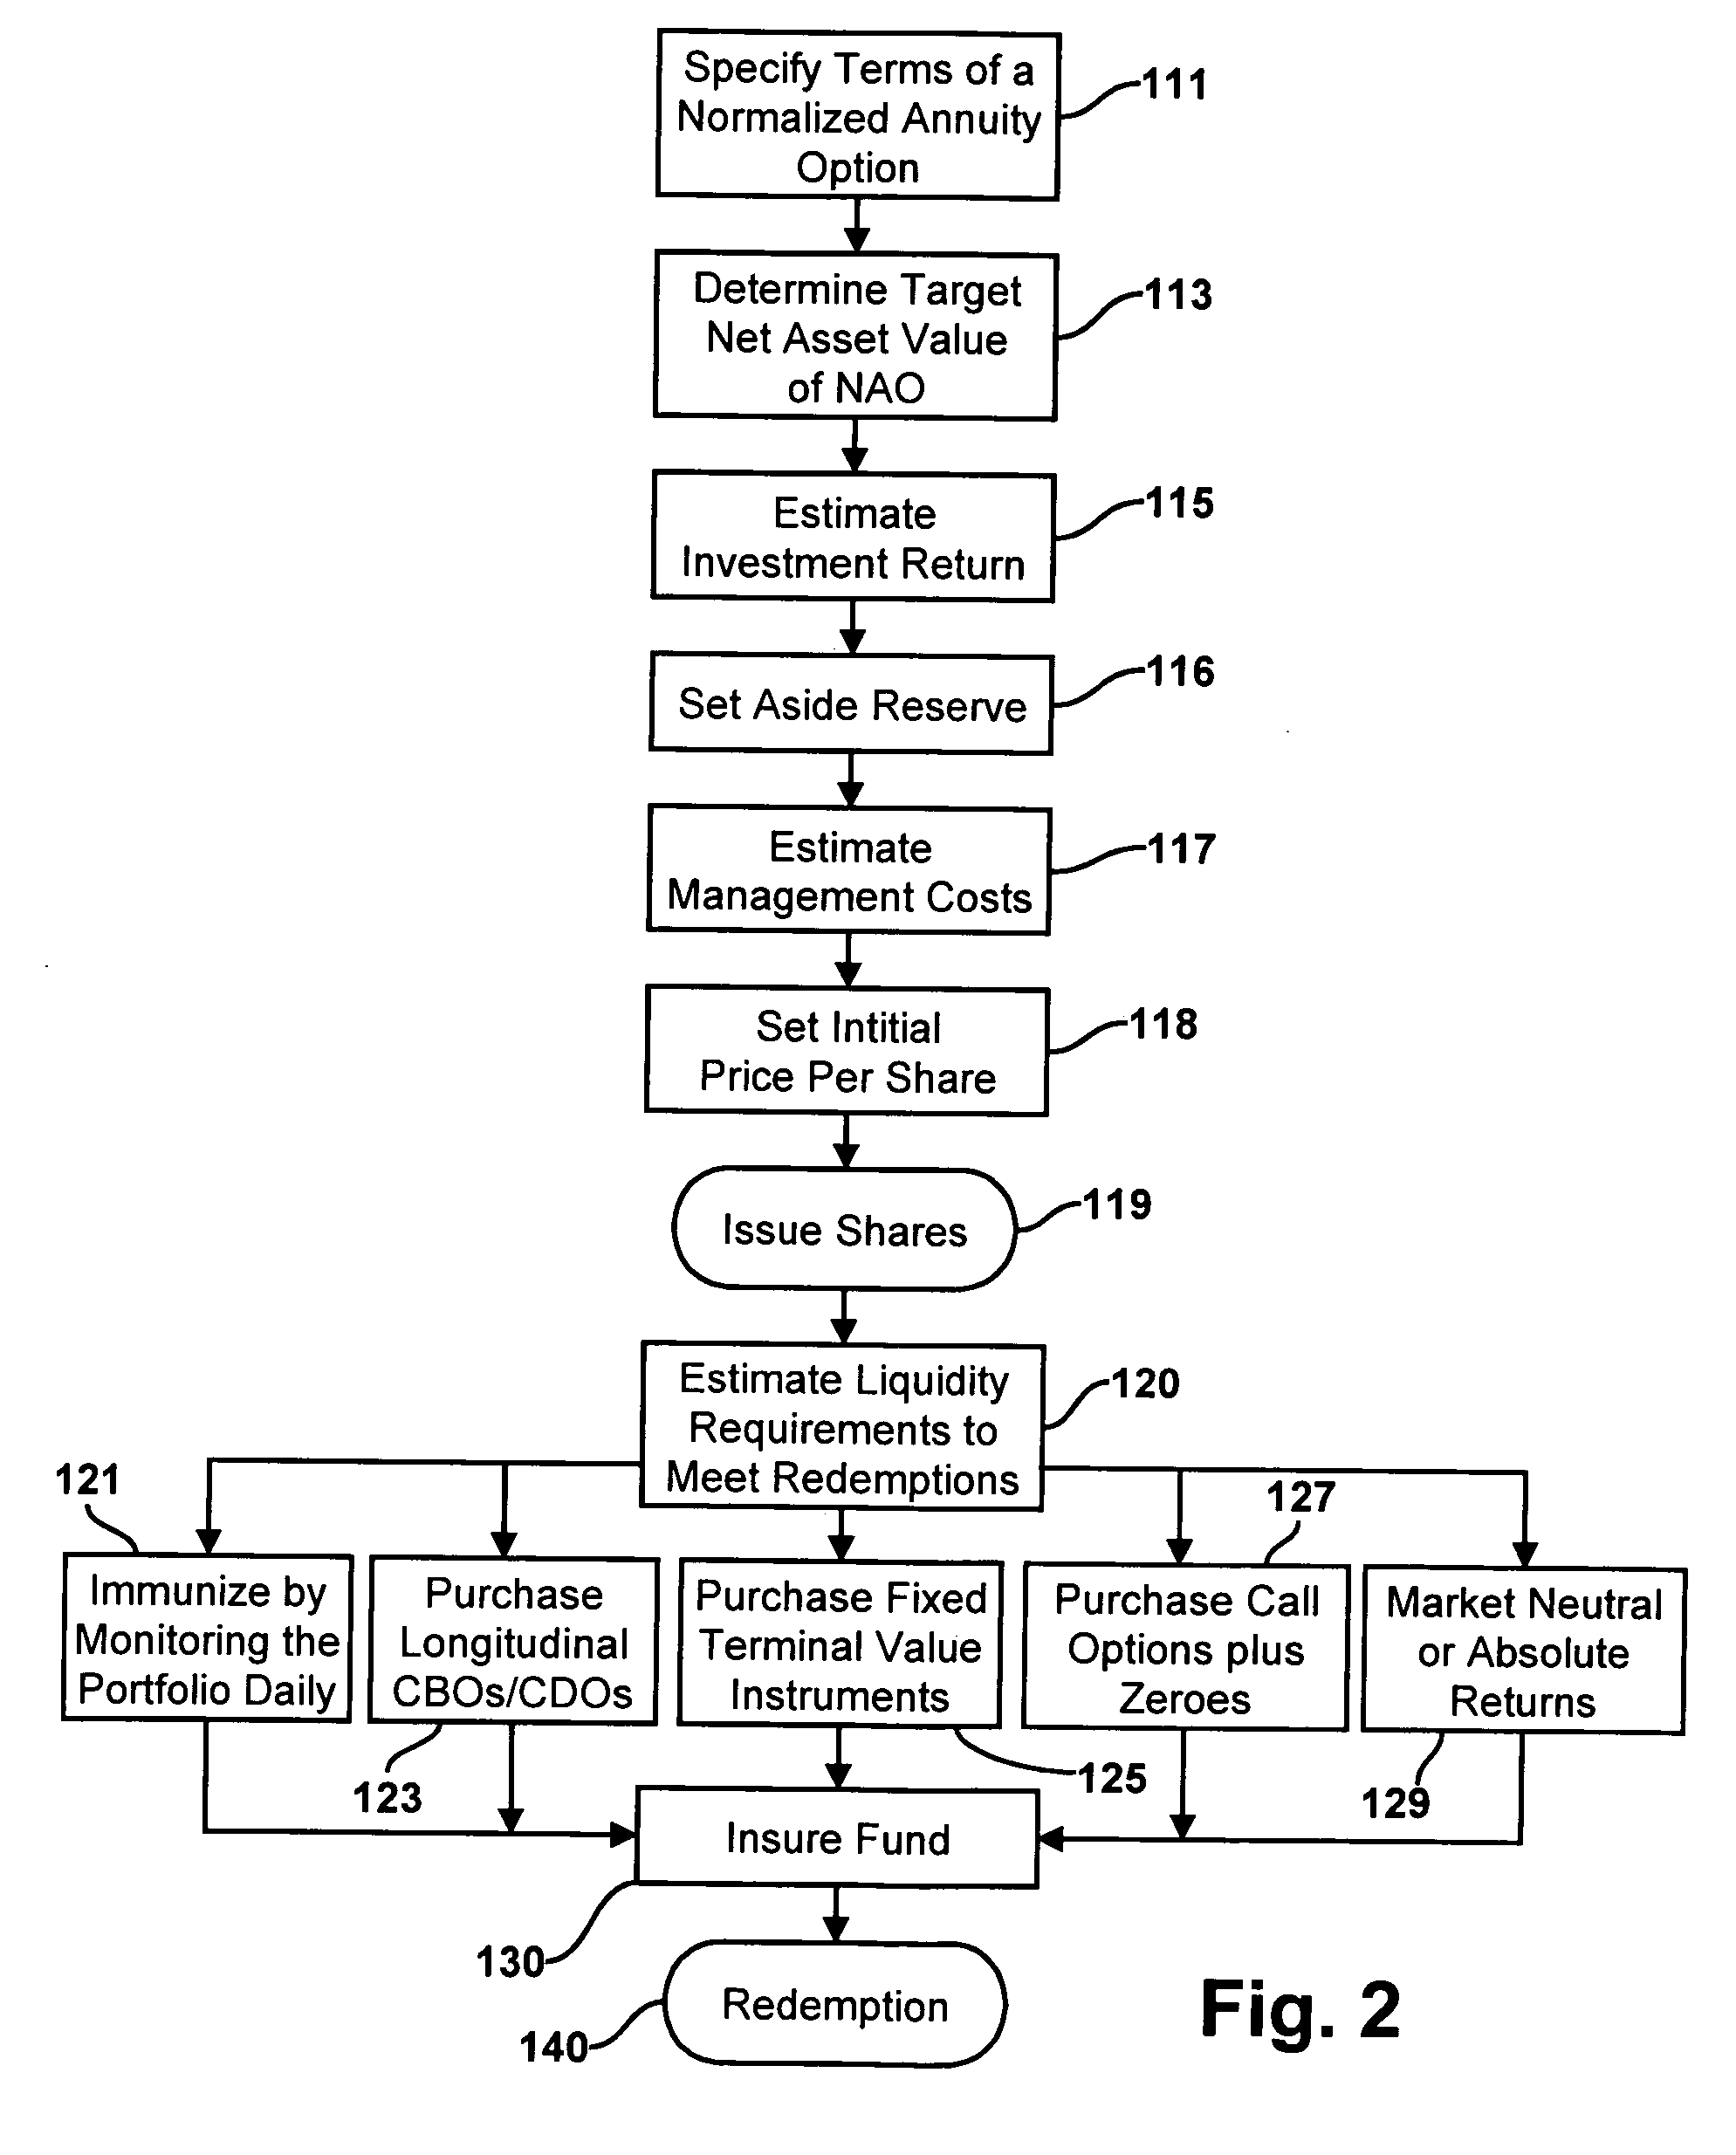 Methods for issuing, distributing, managing and redeeming investment instruments providing normalized annuity options